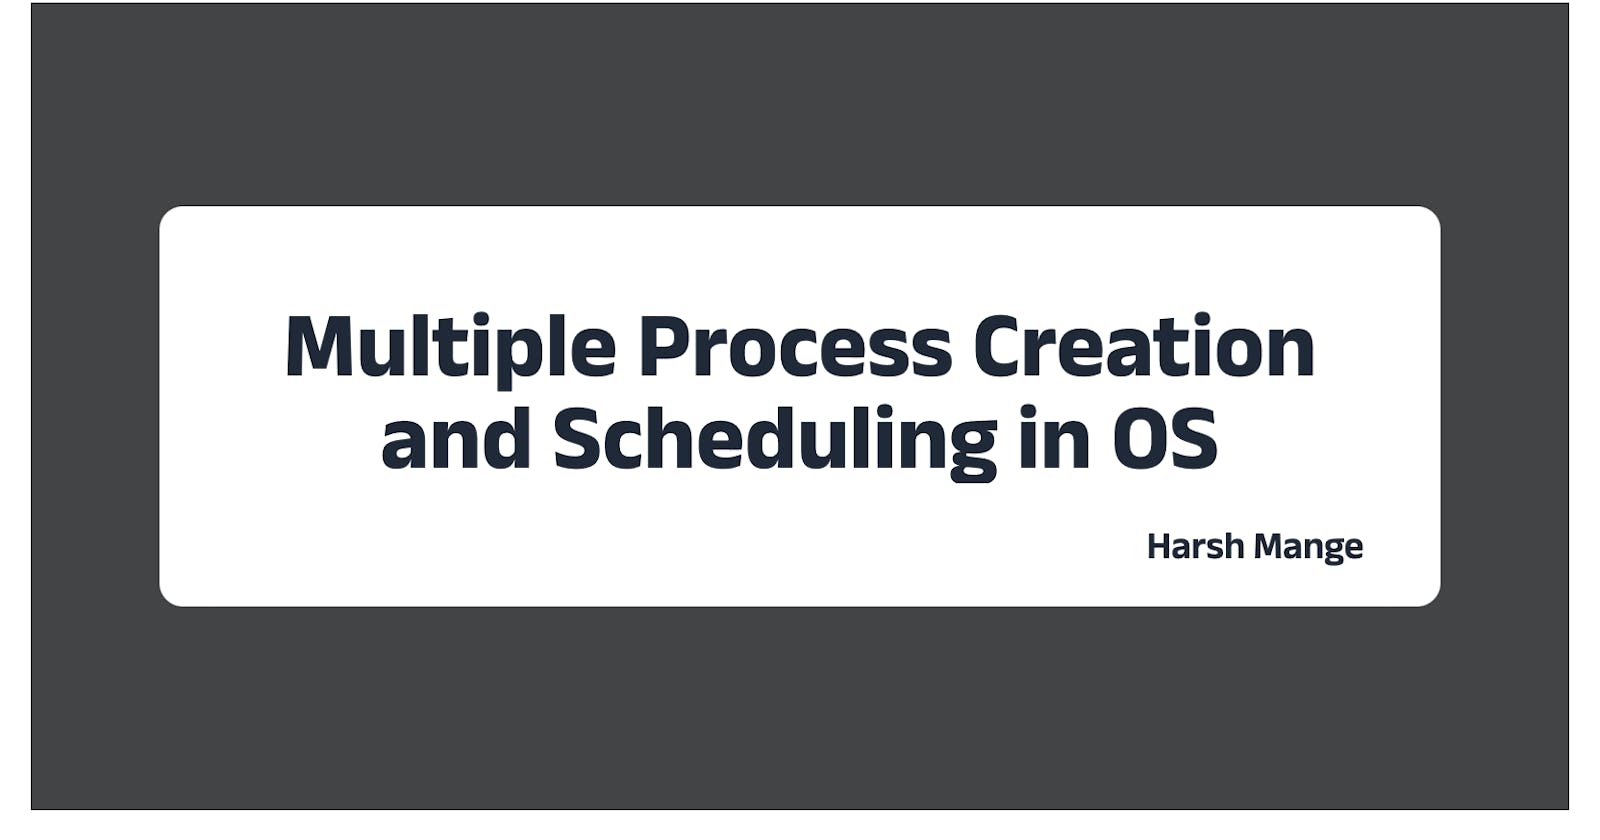 Multiple Process Creation and Scheduling in OS: Practical Example with Code